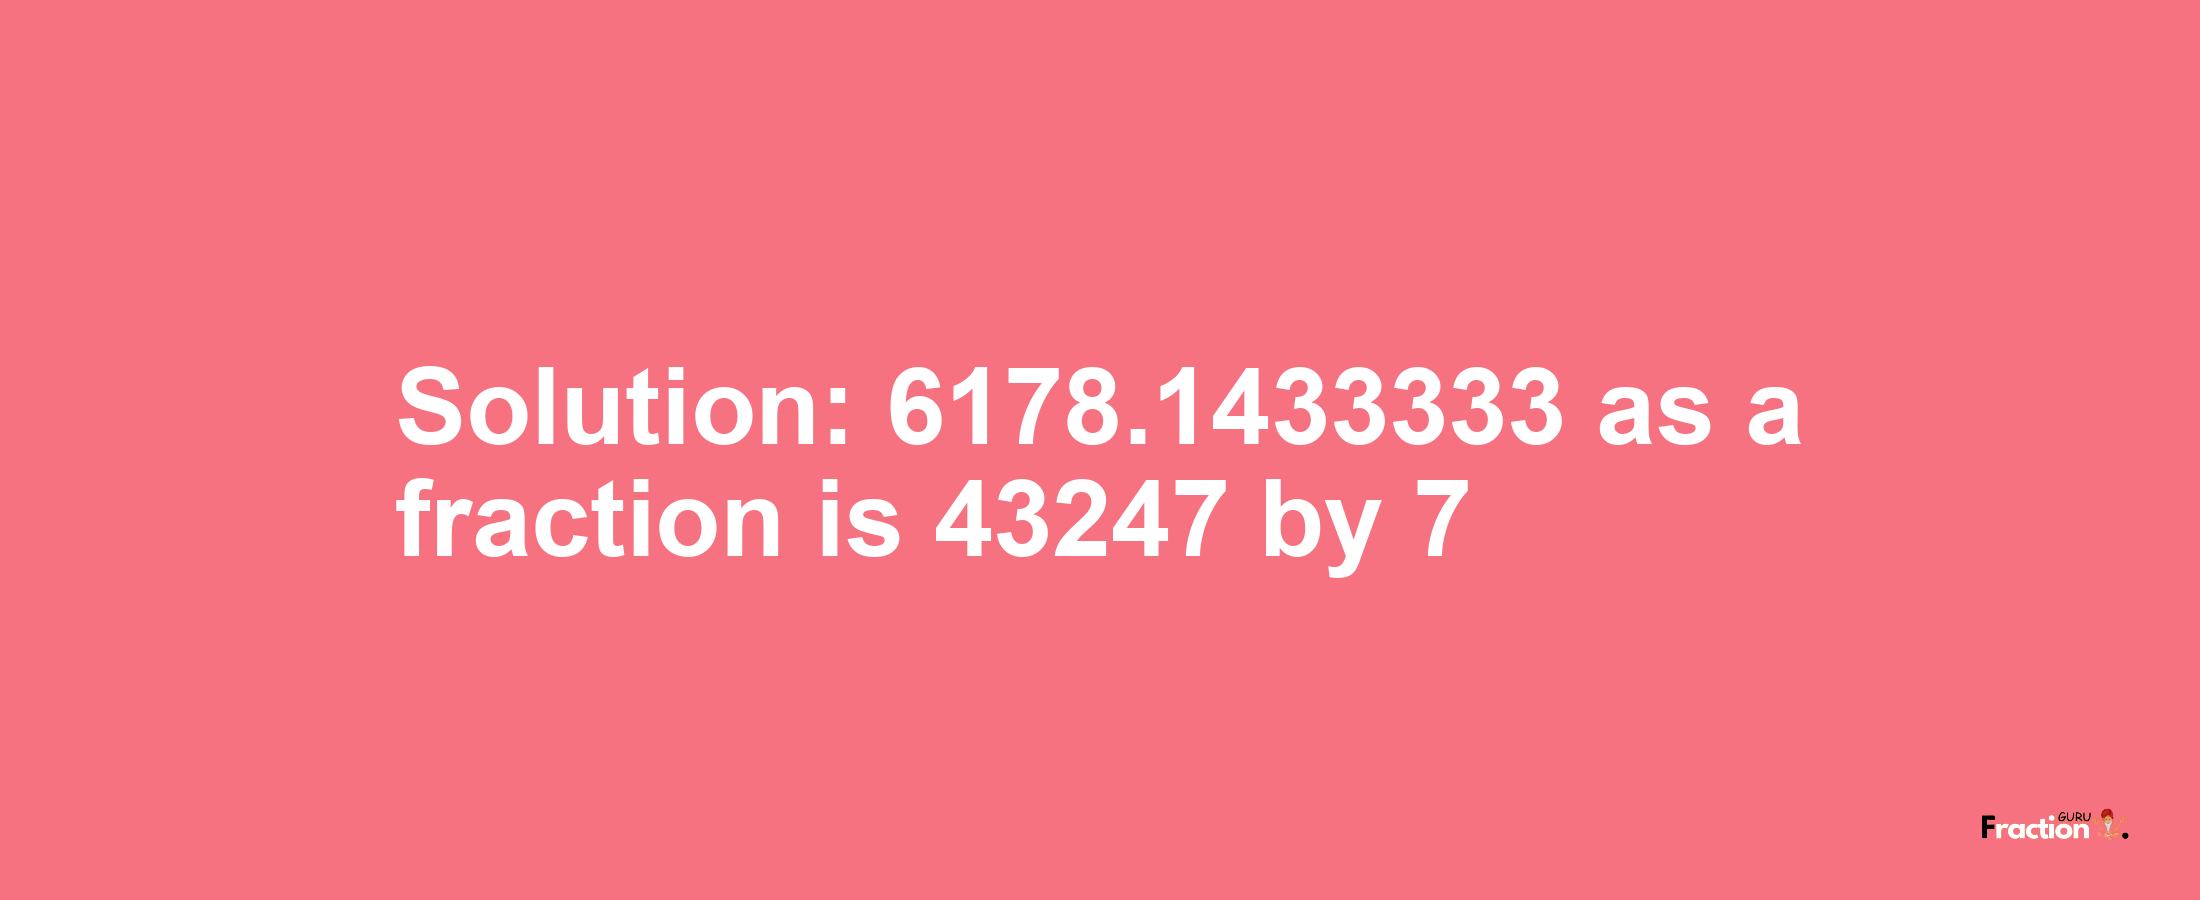 Solution:6178.1433333 as a fraction is 43247/7